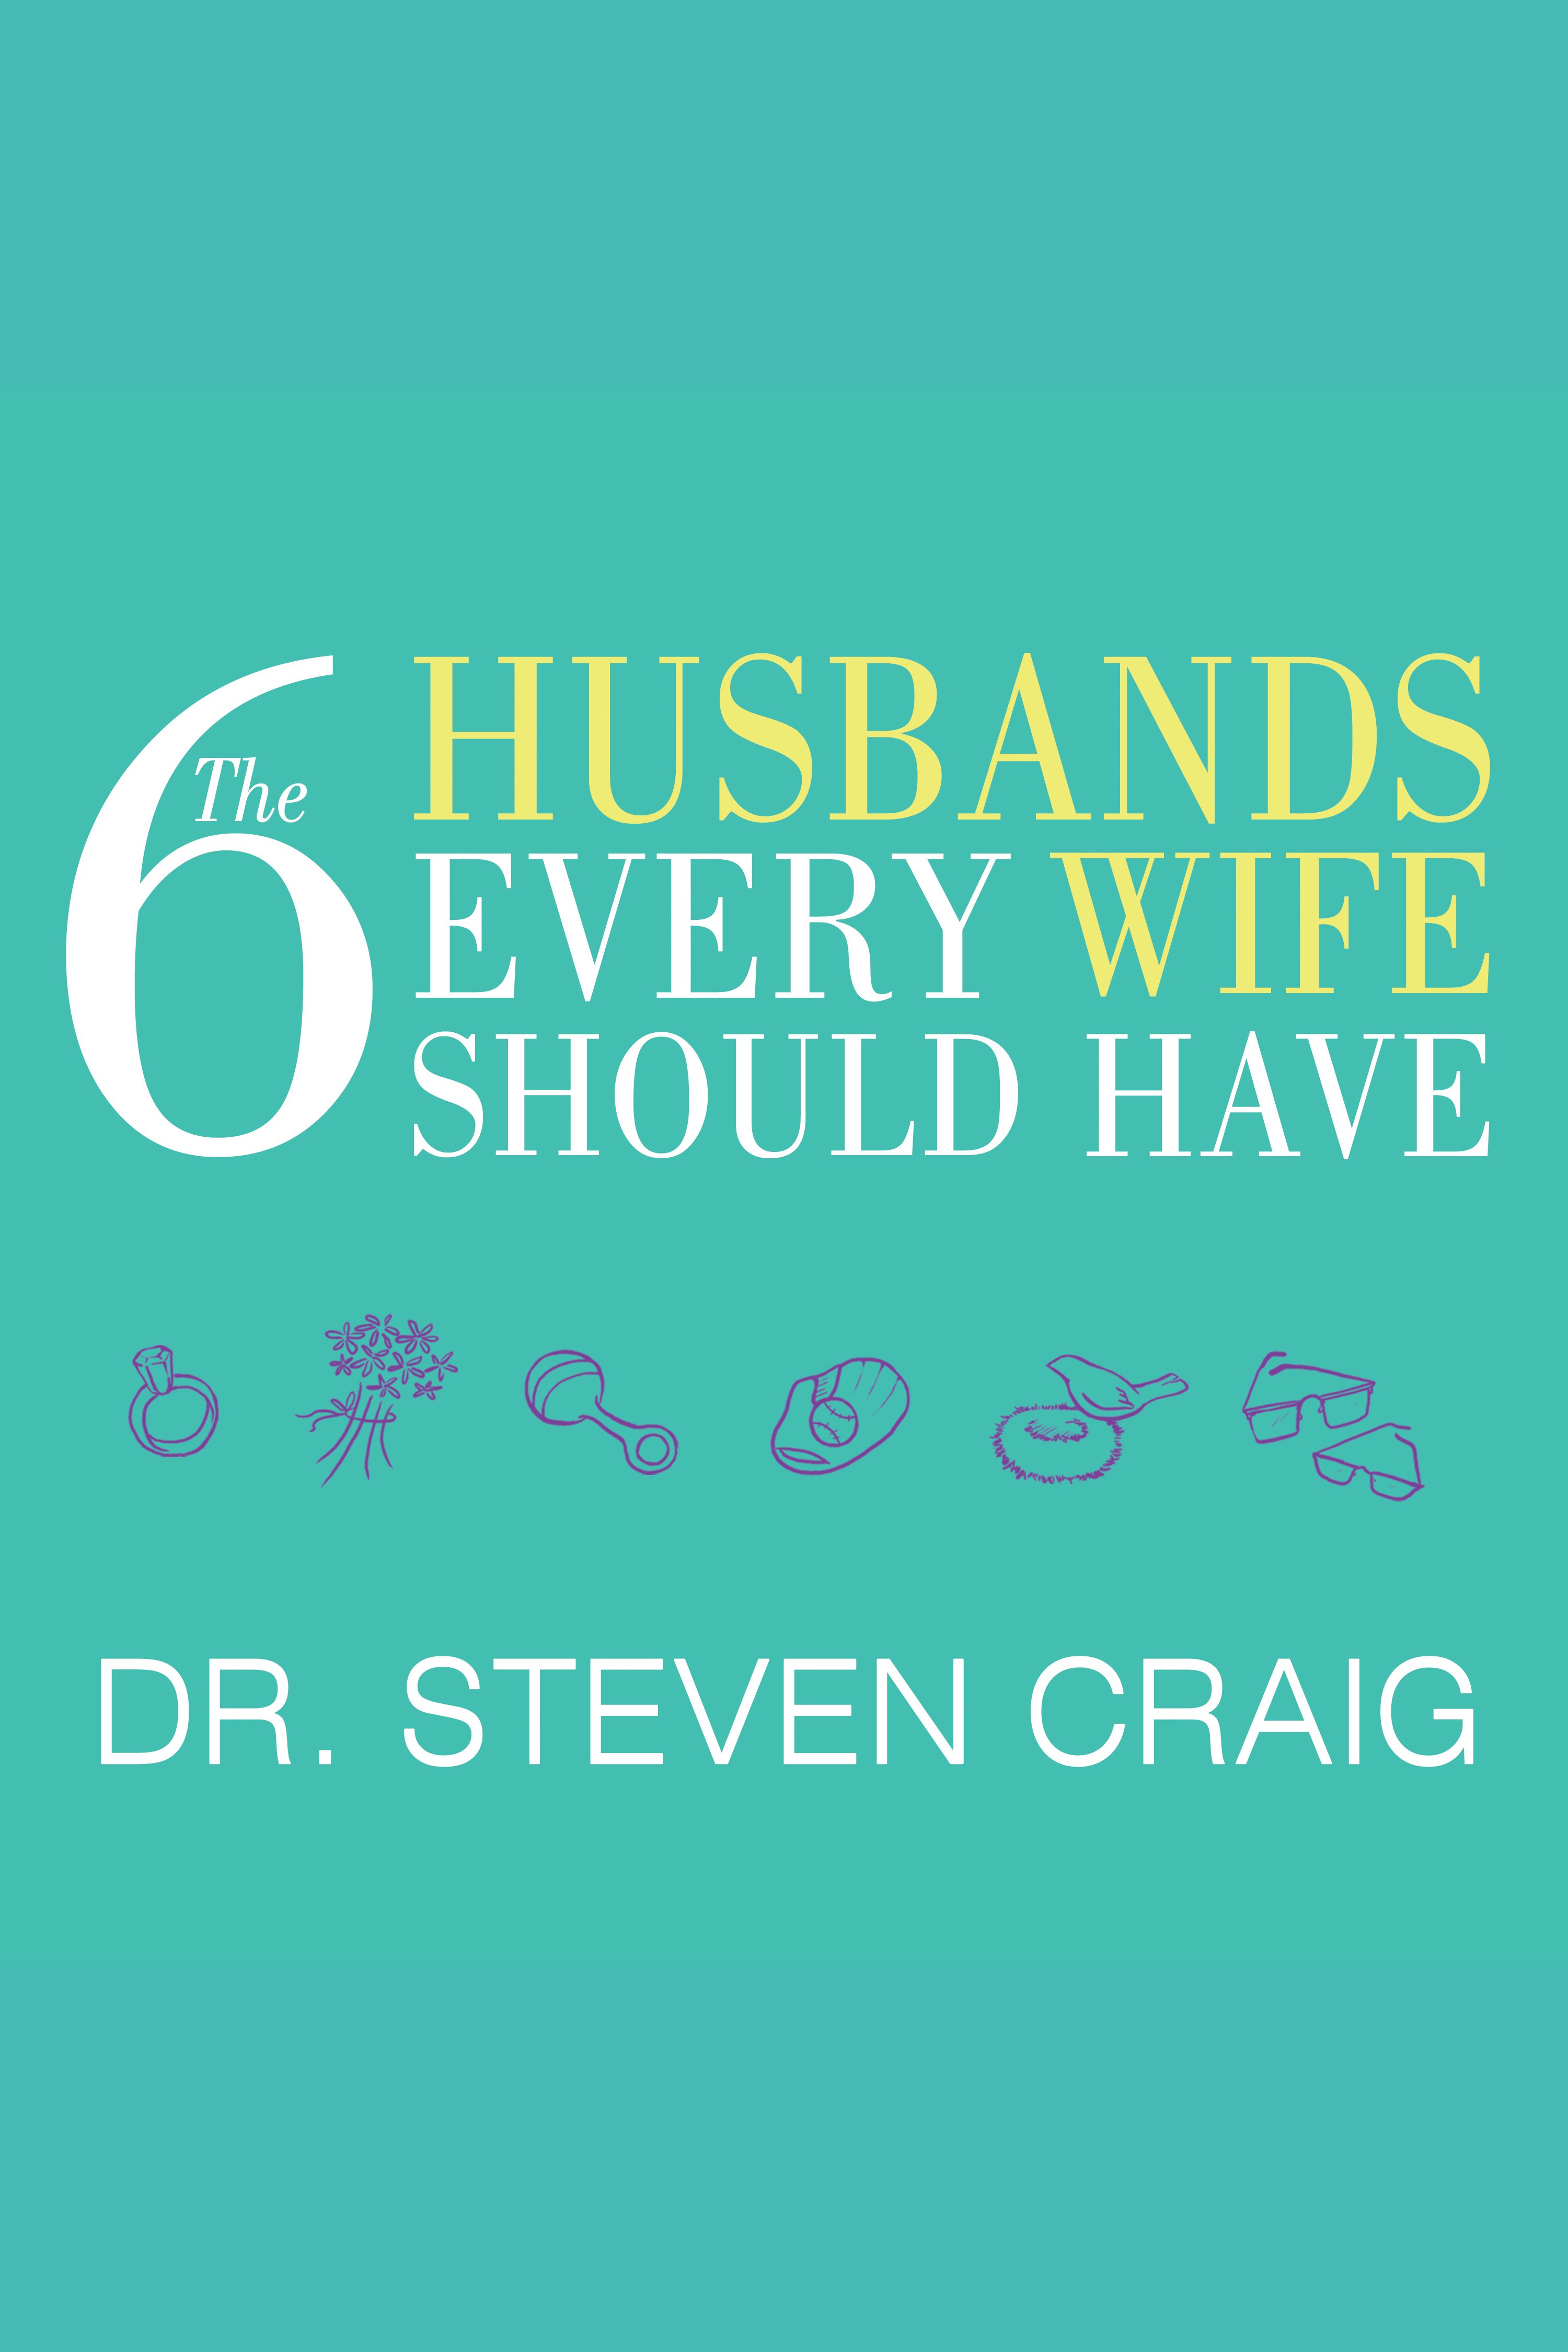 The 6 husbands every wife should have cover image